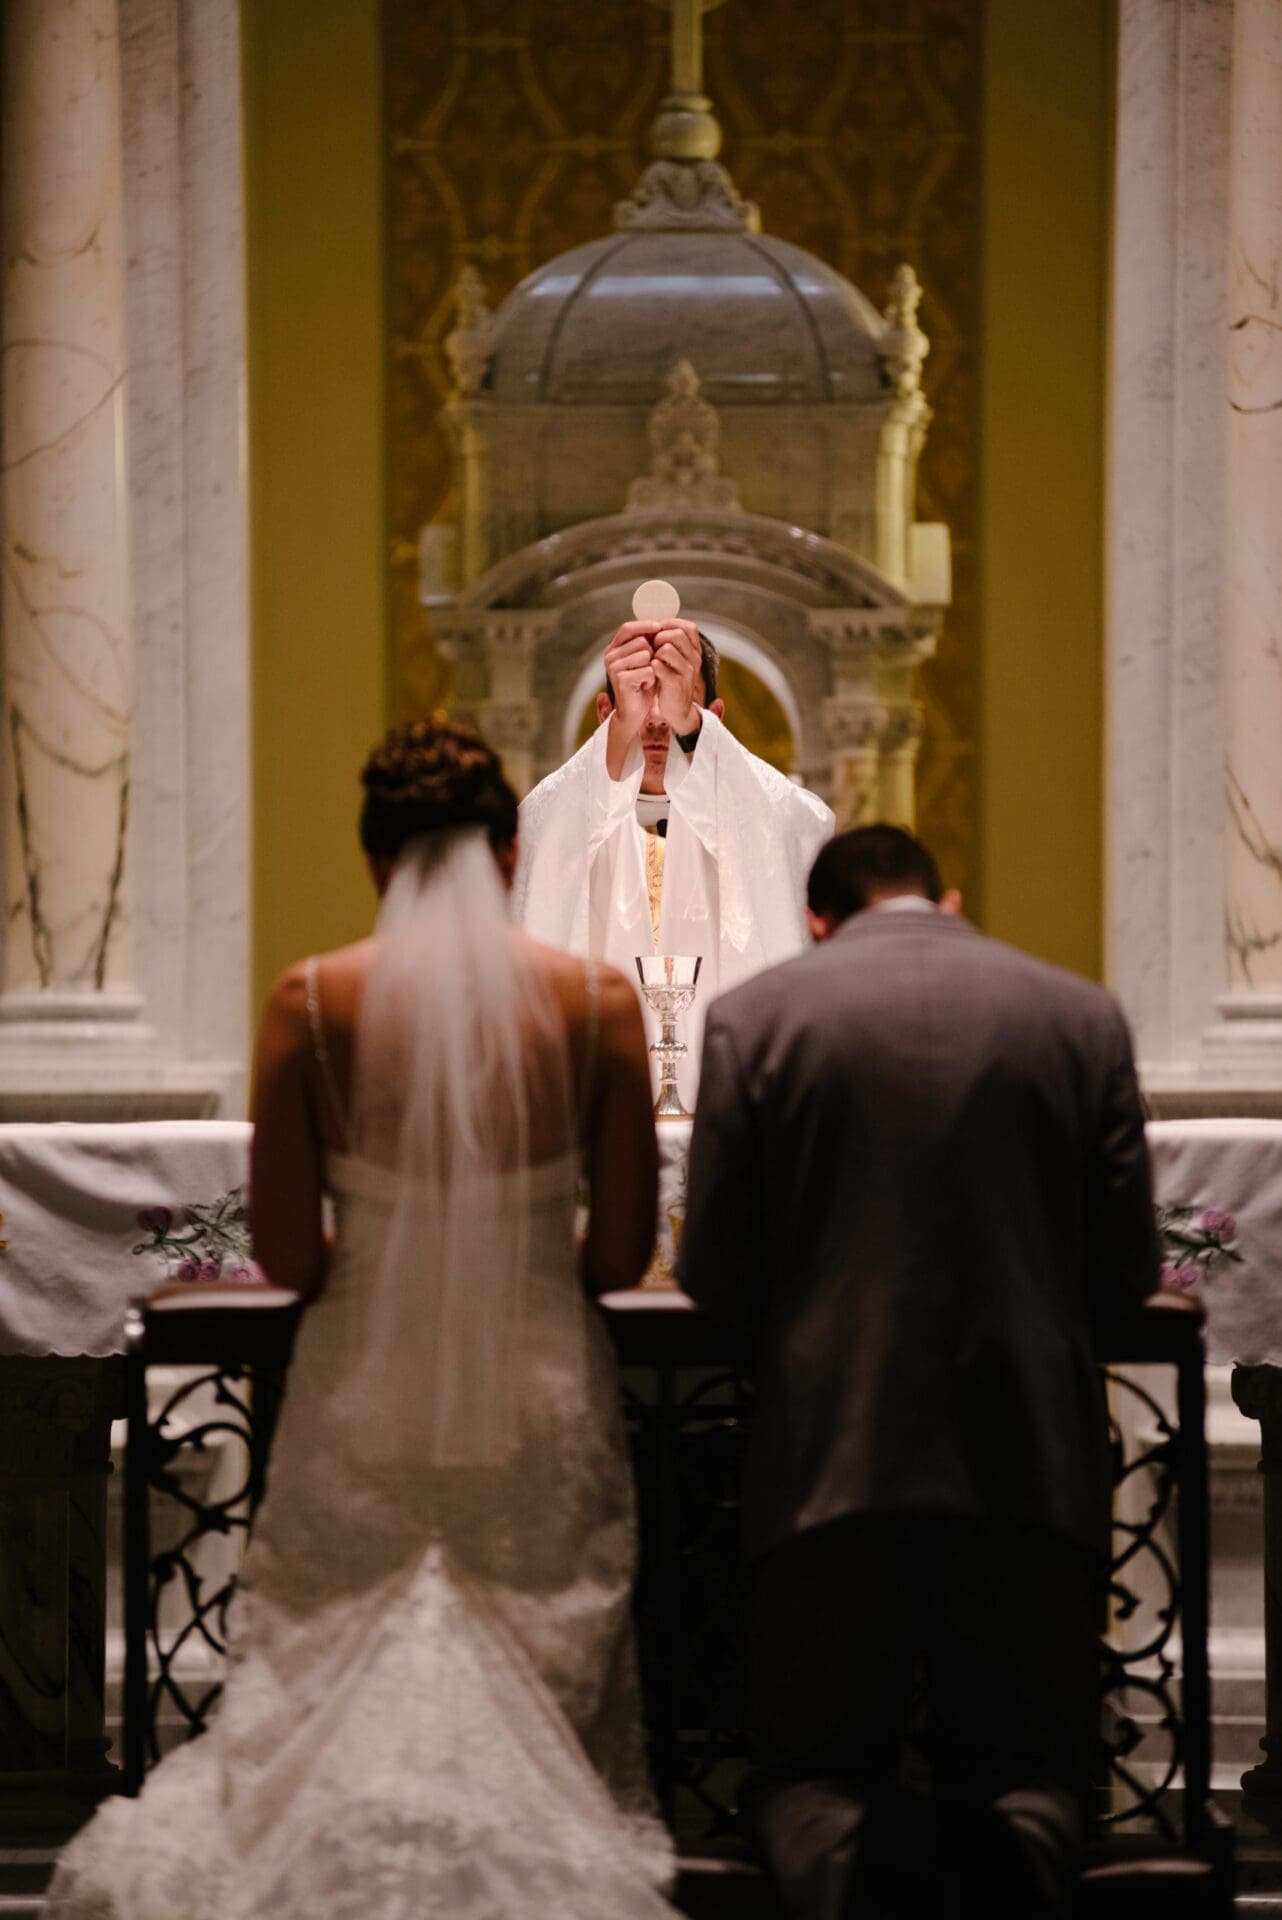 Wedding Prayers and Love: The Fruitful Work of the Liturgy in Marriage Preparation